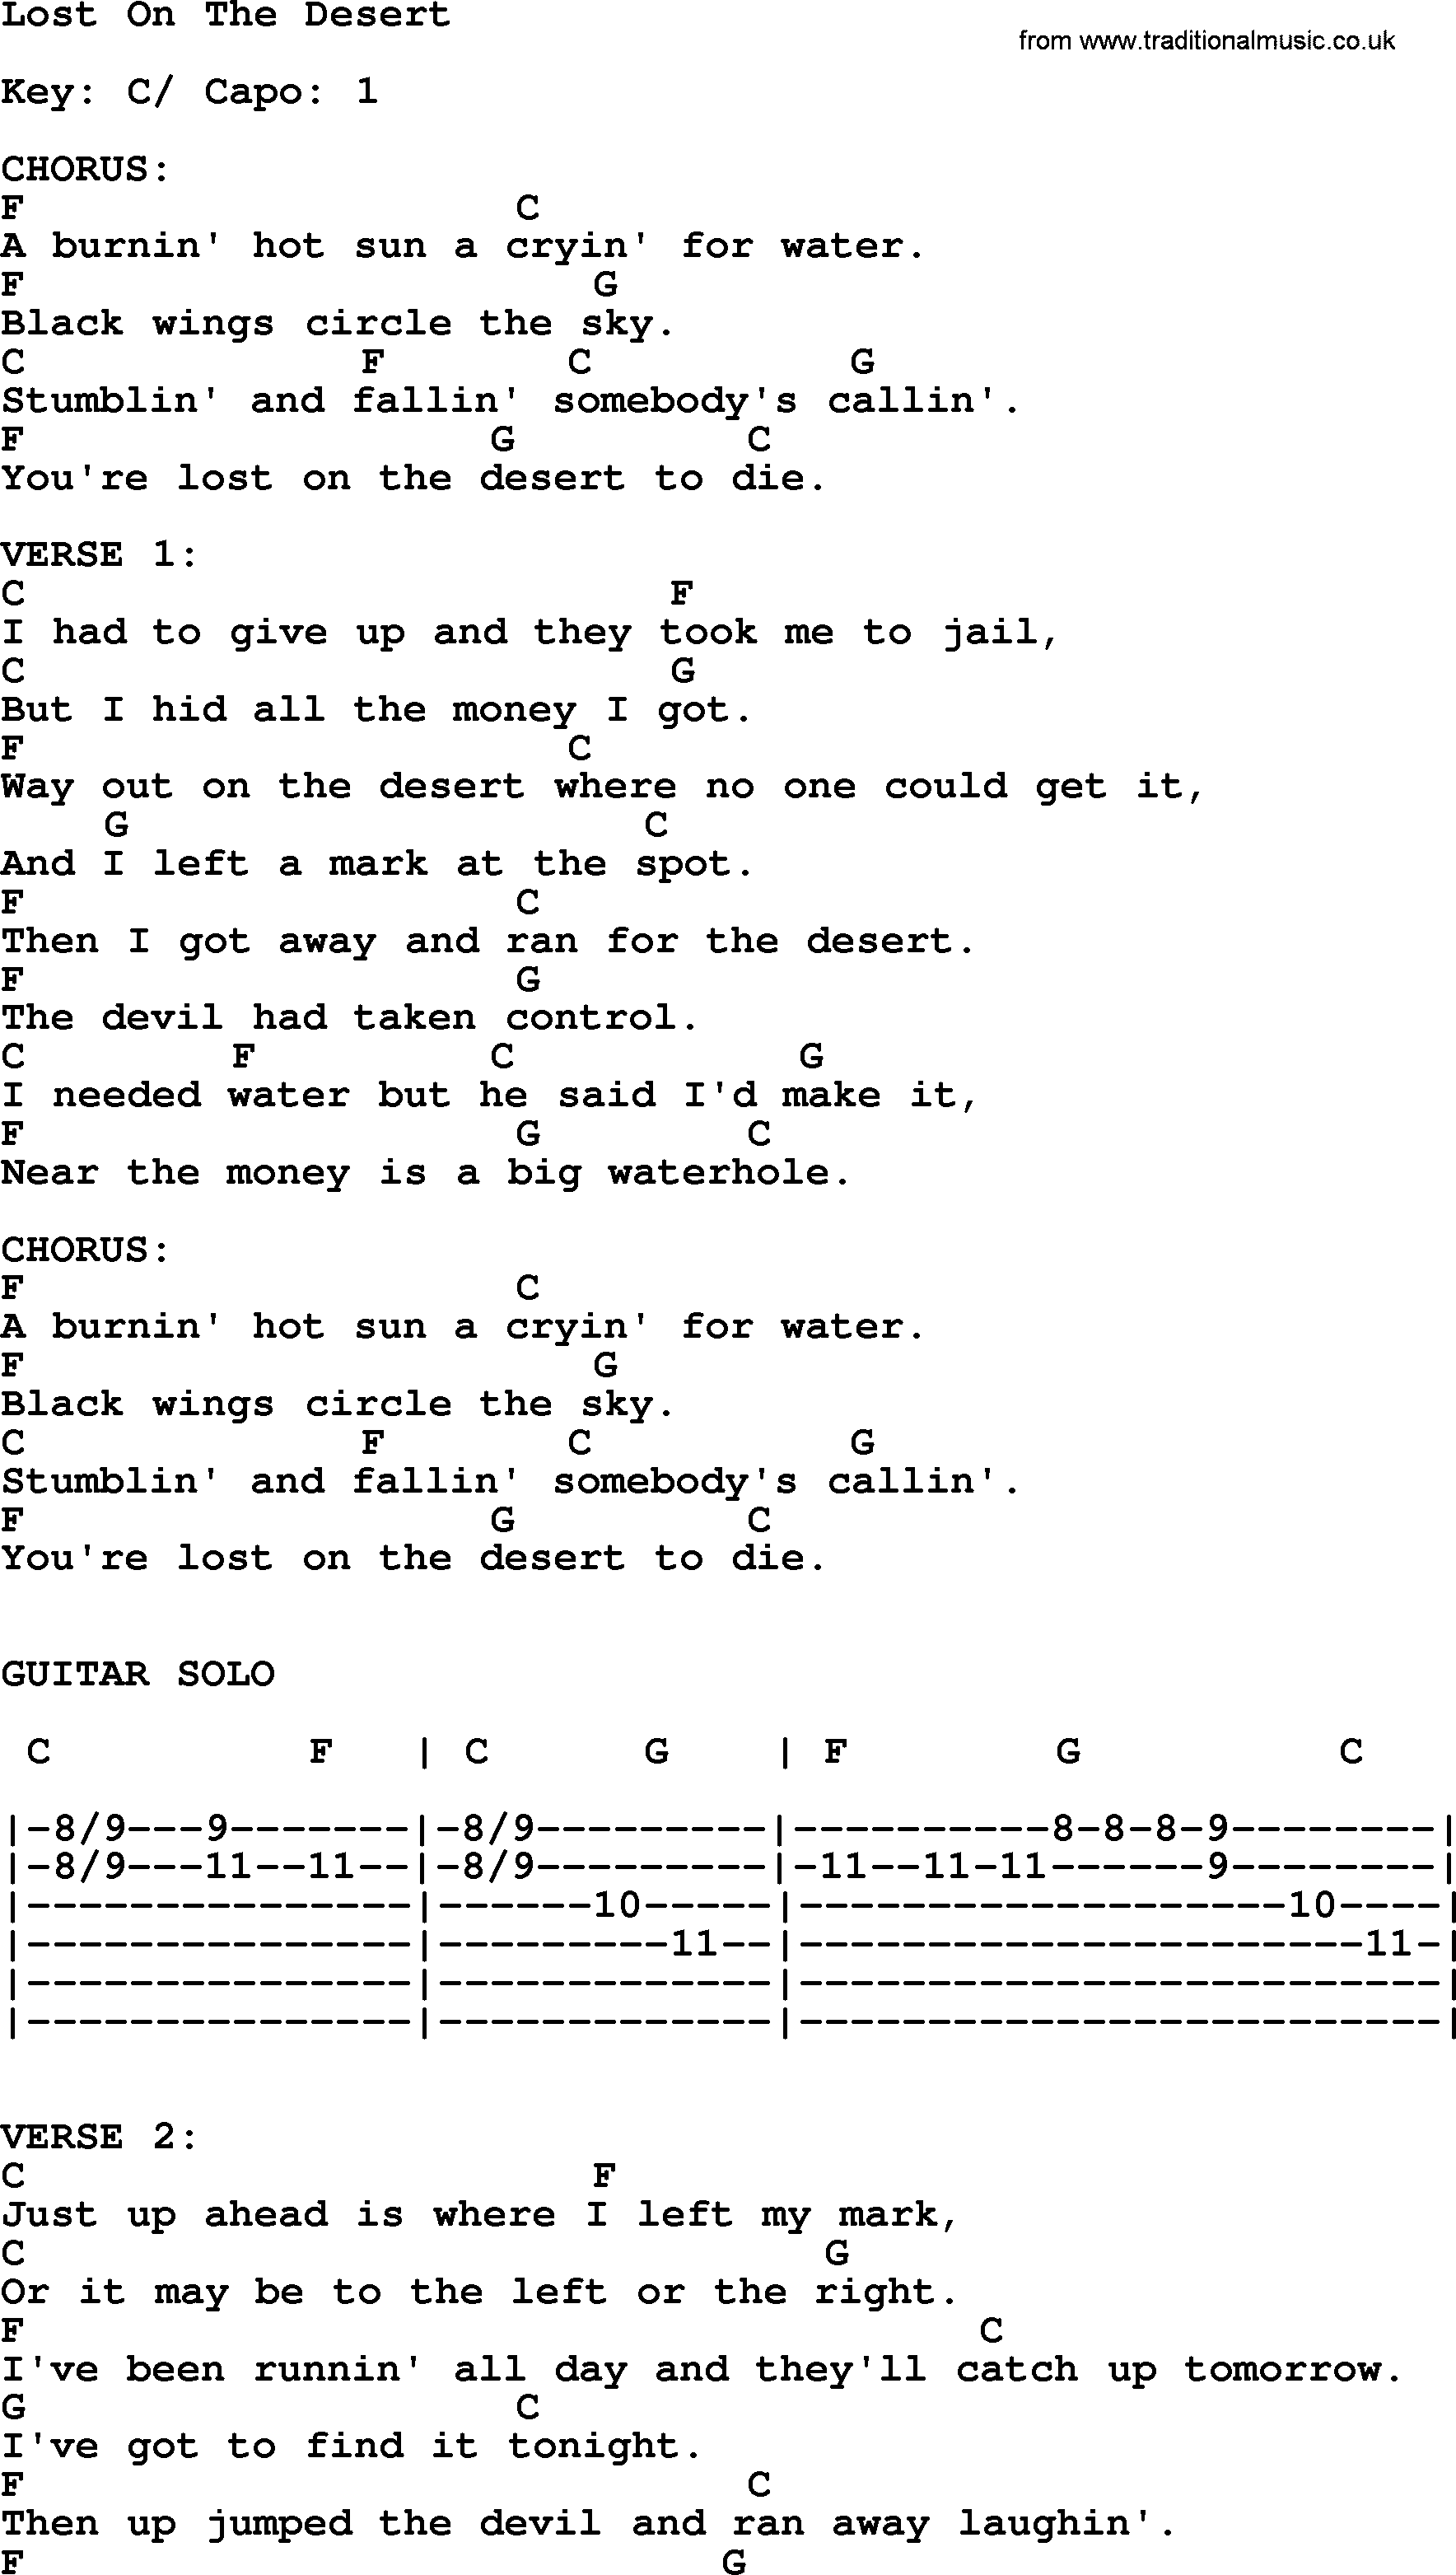 Johnny Cash song Lost On The Desert, lyrics and chords